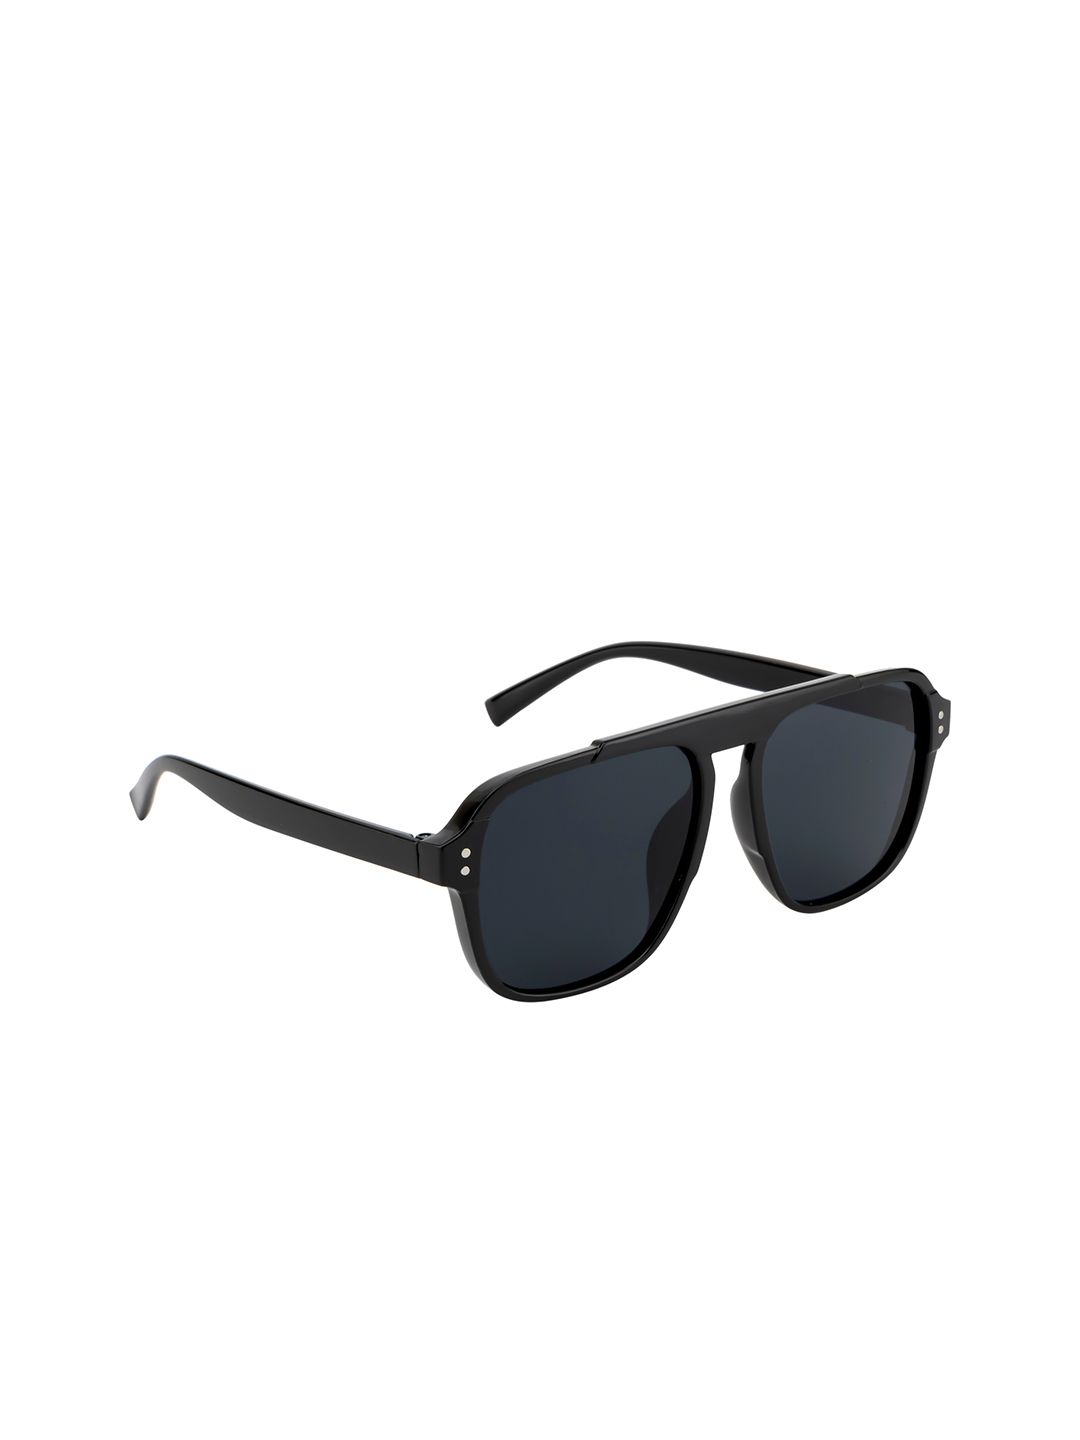 Ted Smith Adult Black Lens & Black Aviator Sunglasses with UV Protected Lens N-XMEN_GRY Price in India